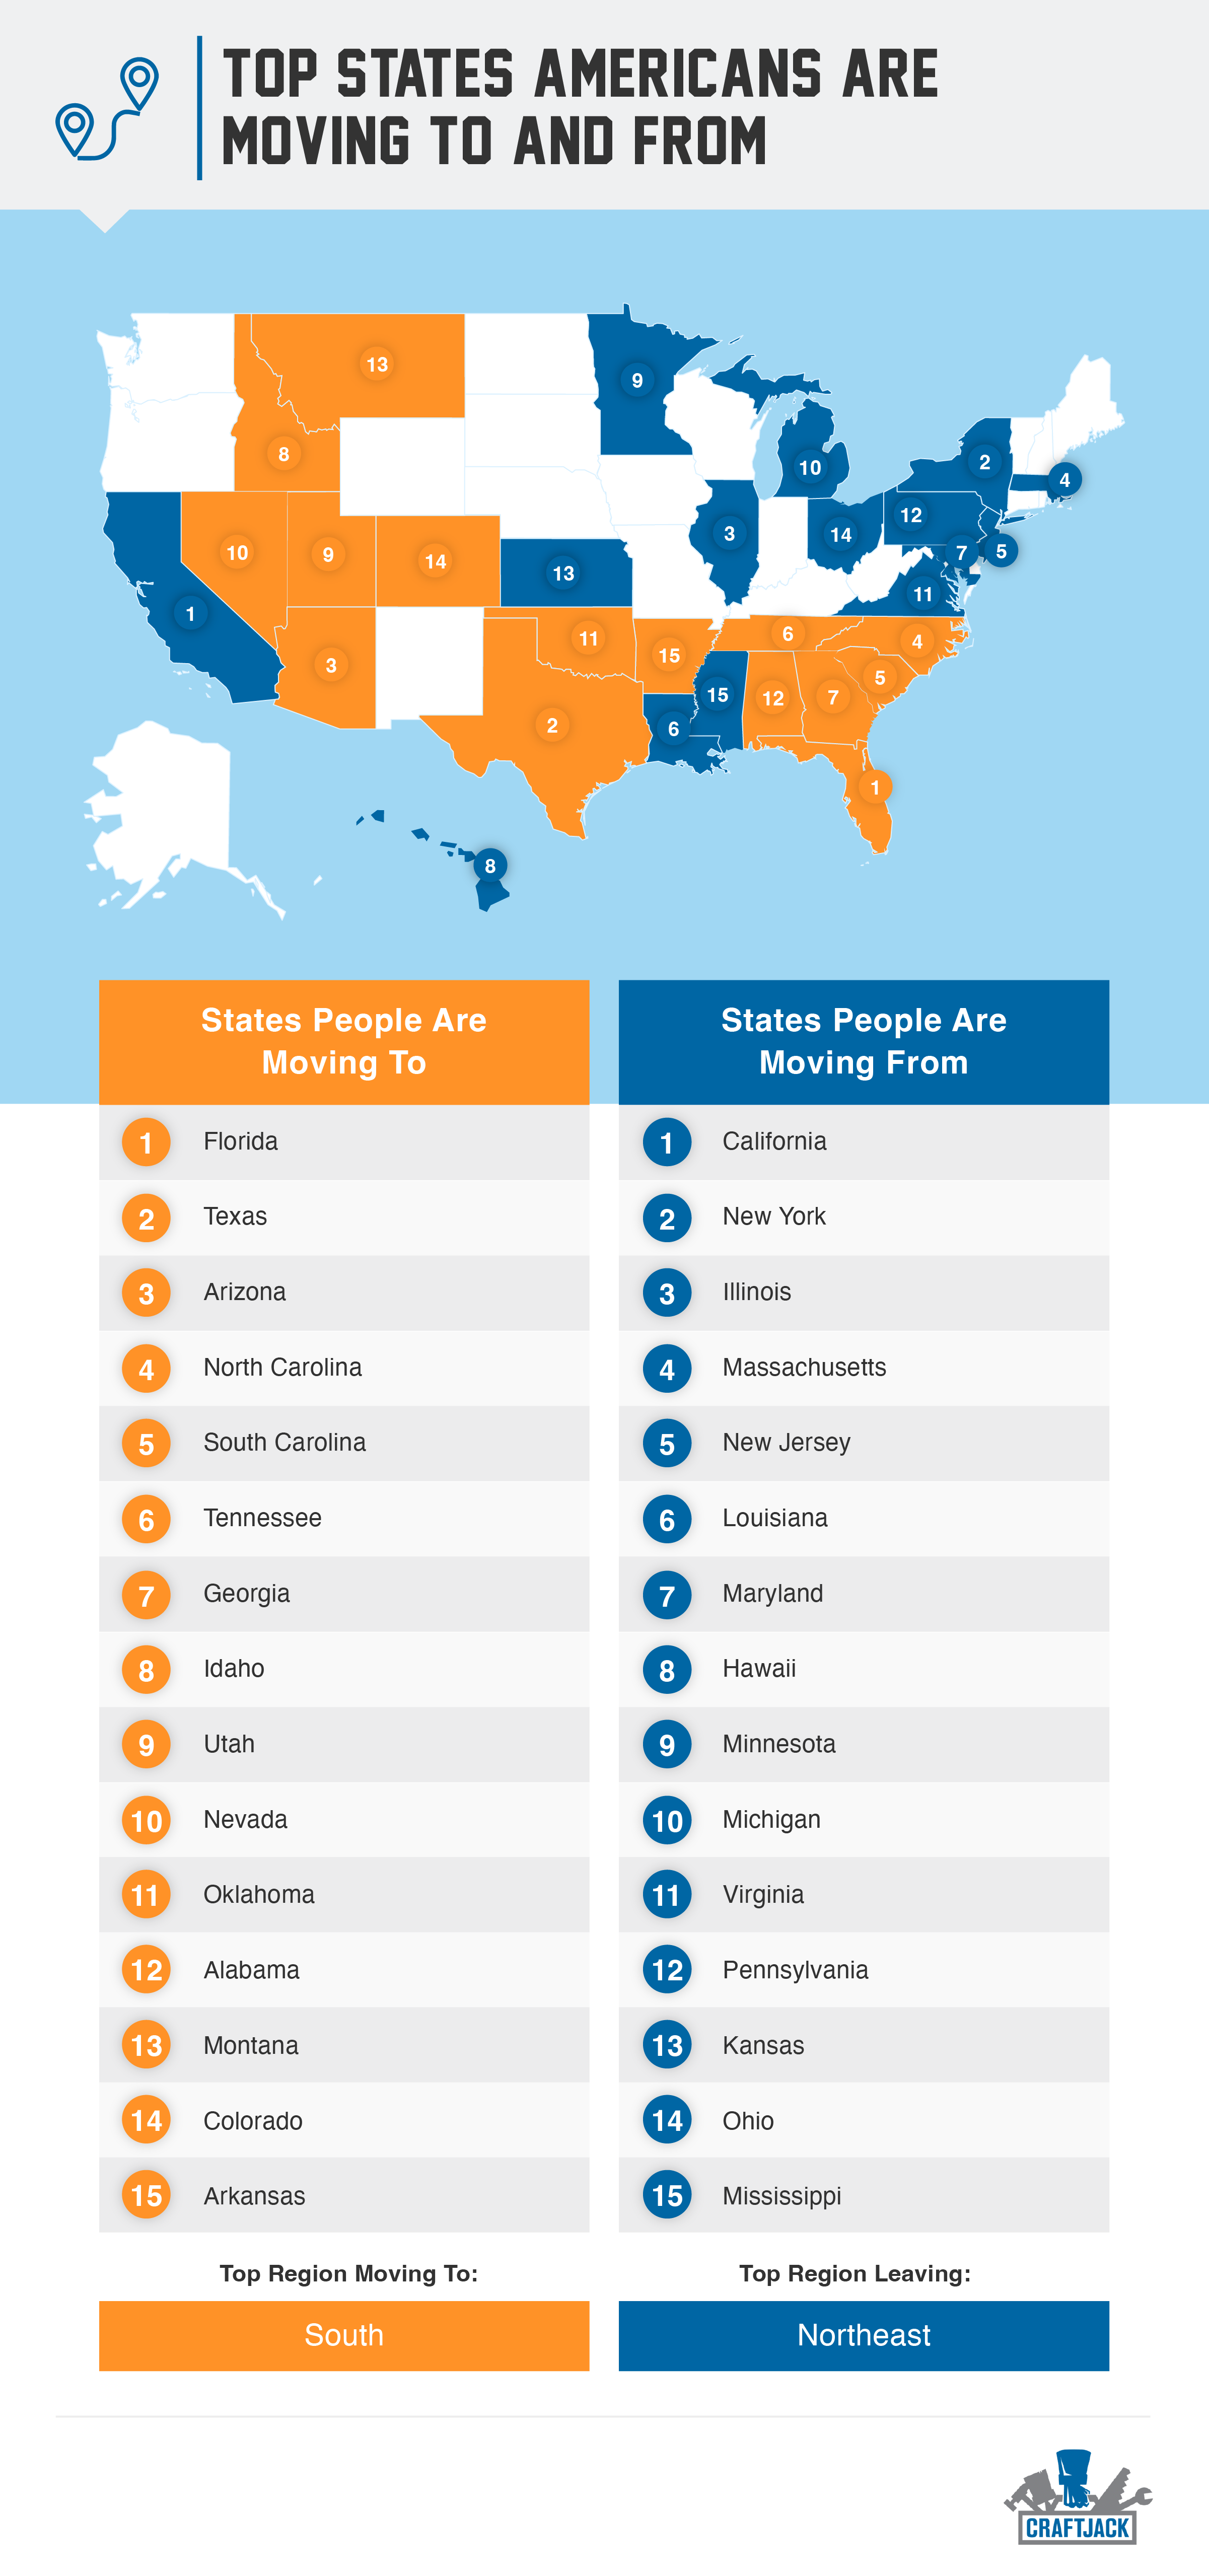 Top States Americans are moving to and from.